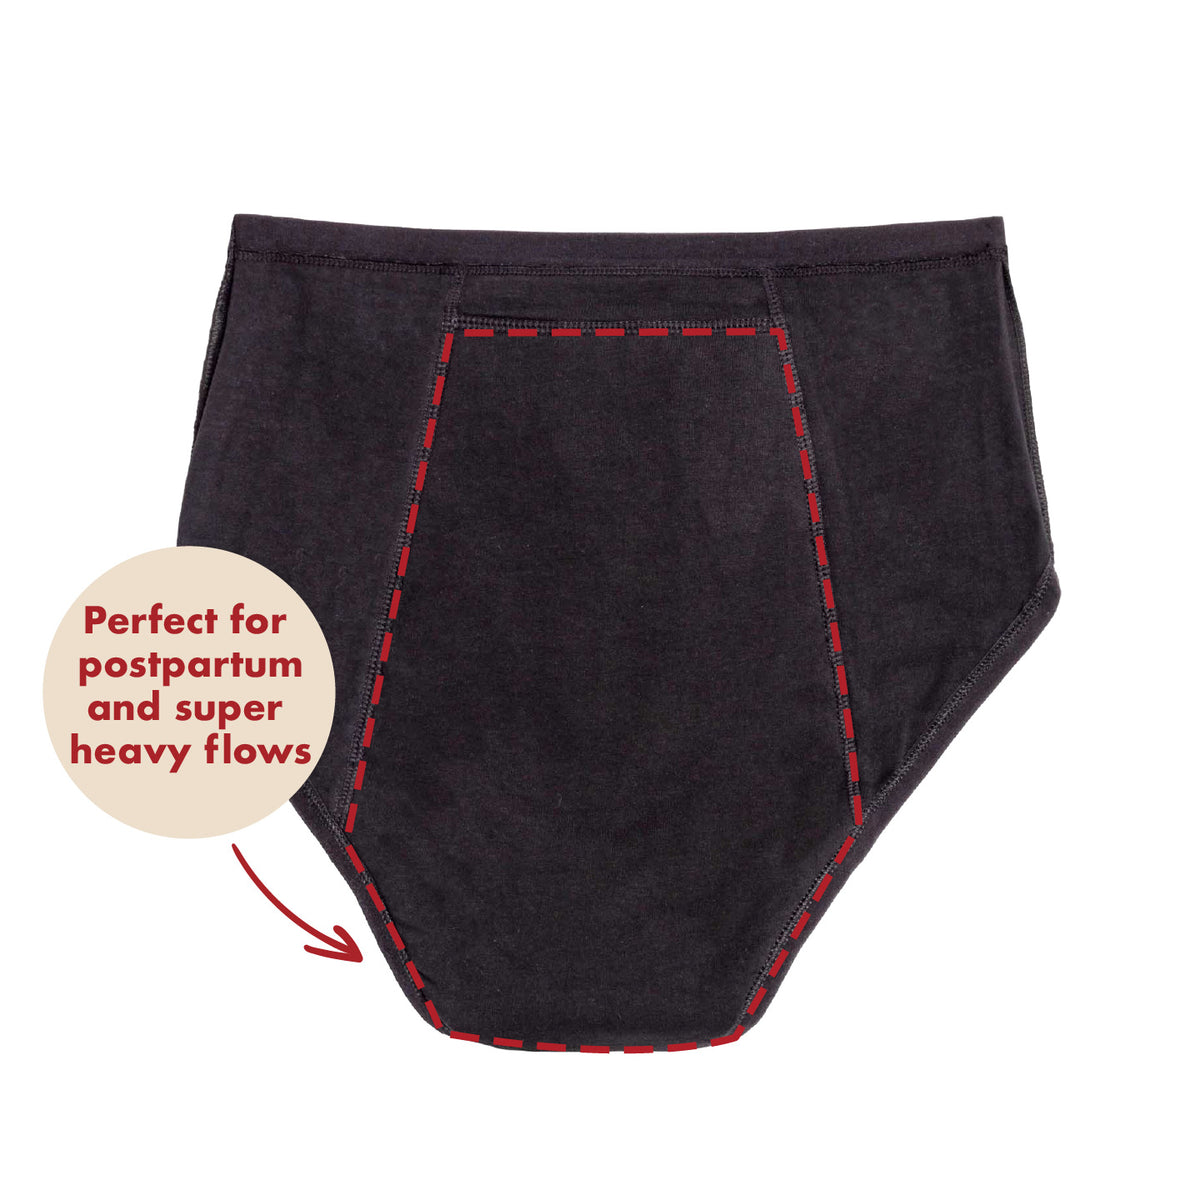 Heavy Flow - Here's Why Femino's Period Underwear is right for you!